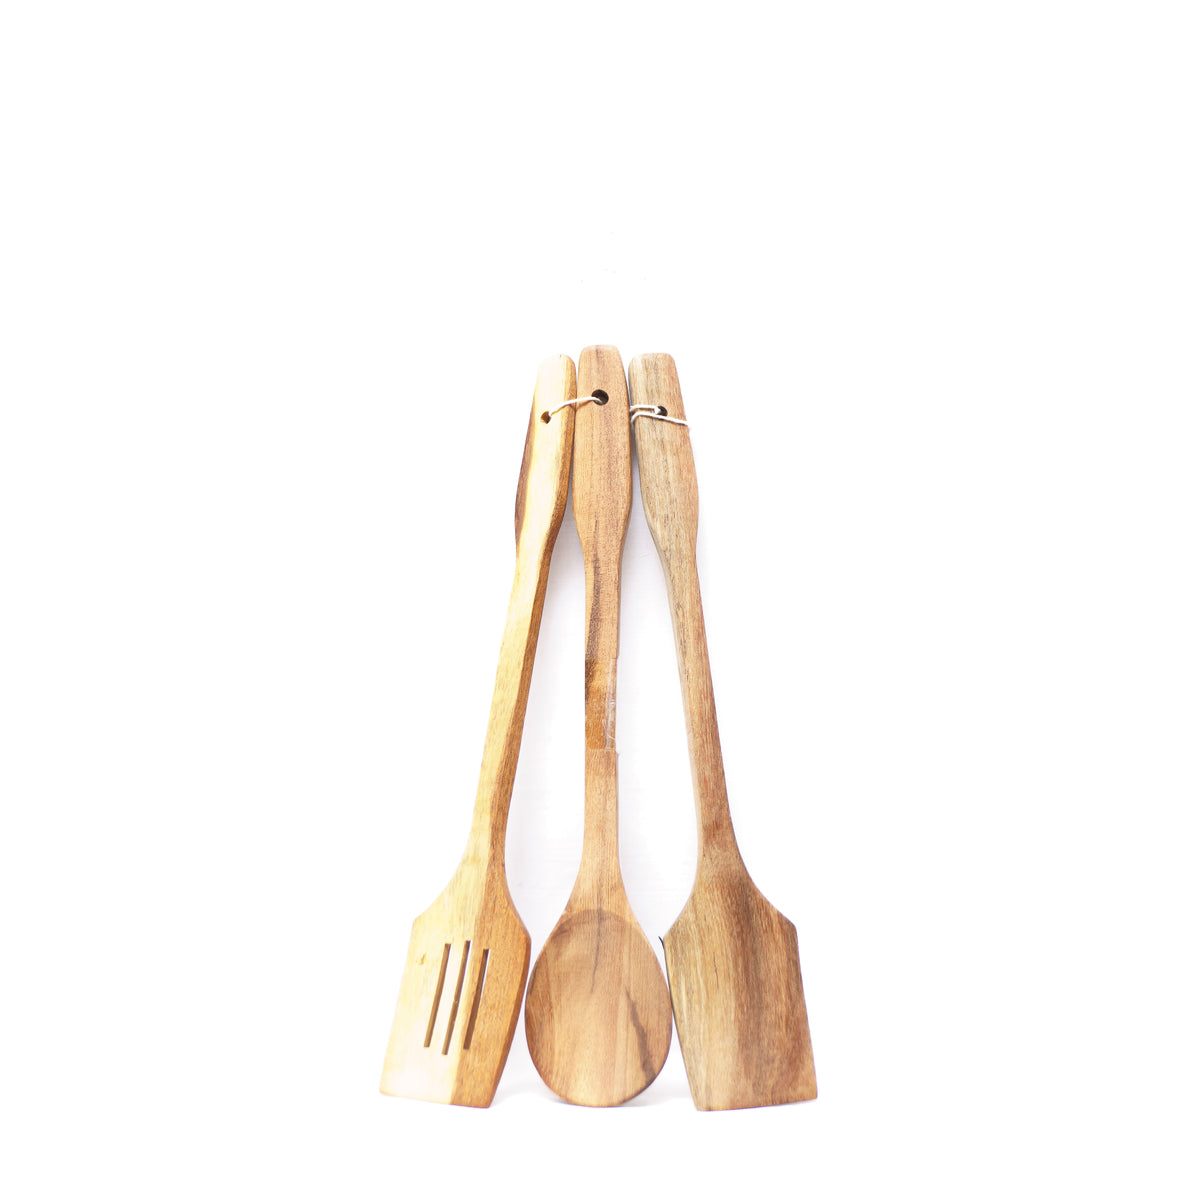 Quality Wooden Spoon Set for Kitchen: The Heart of Home Cooking